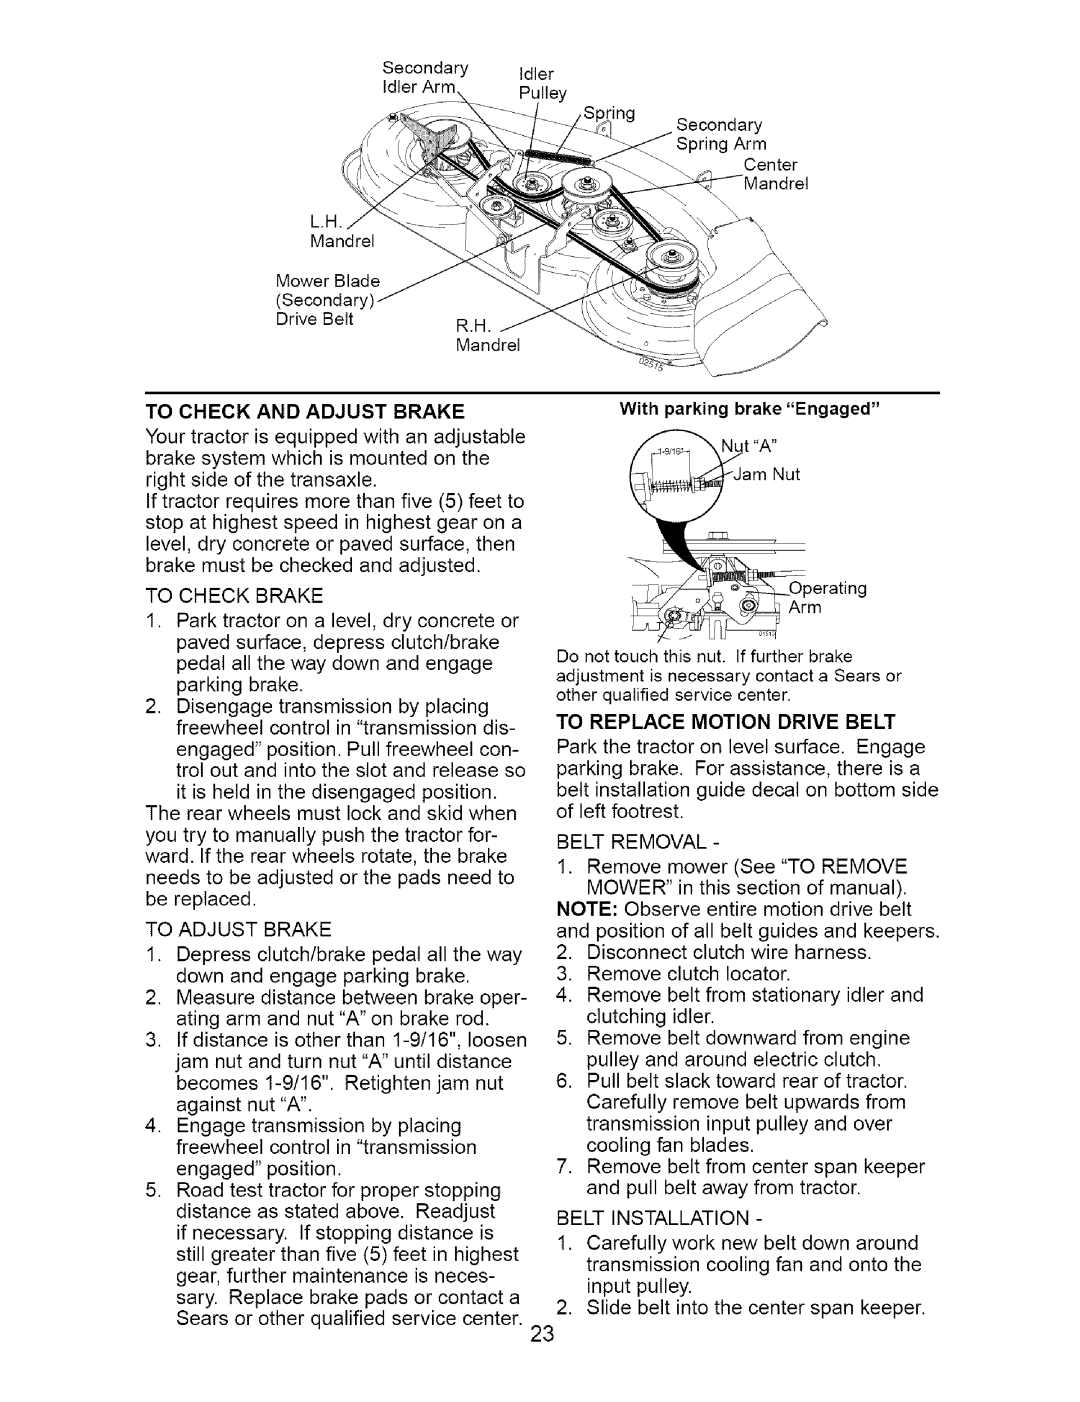 Craftsman 917.273663 owner manual To Check And Adjust Brake, To Replace Motion Drive Belt 